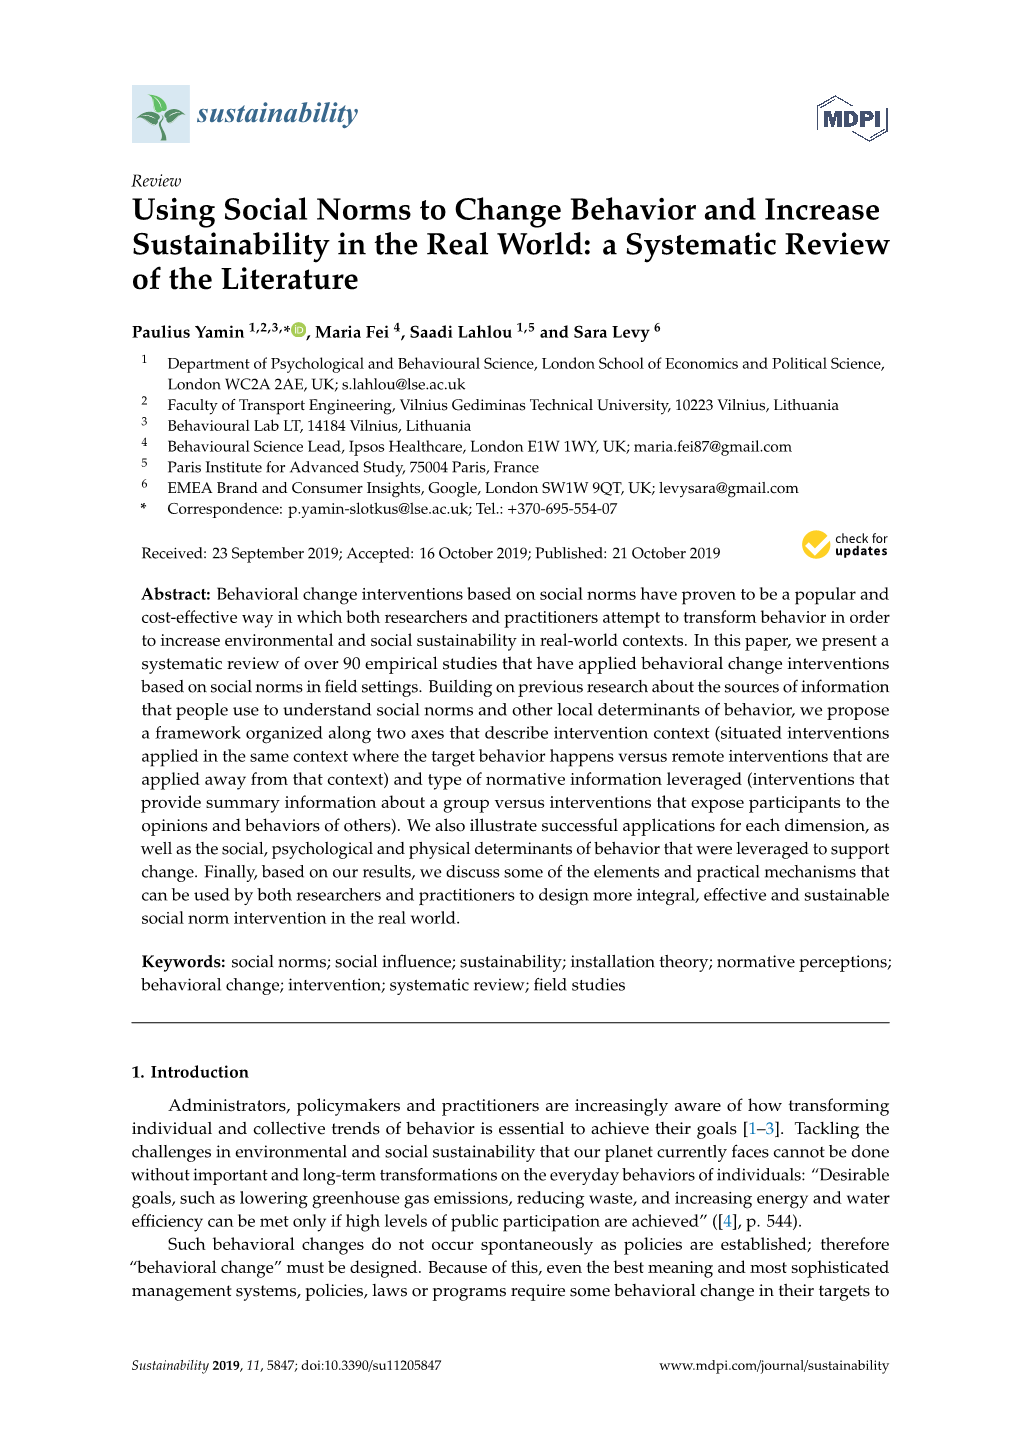 Using Social Norms to Change Behavior and Increase Sustainability in the Real World: a Systematic Review of the Literature